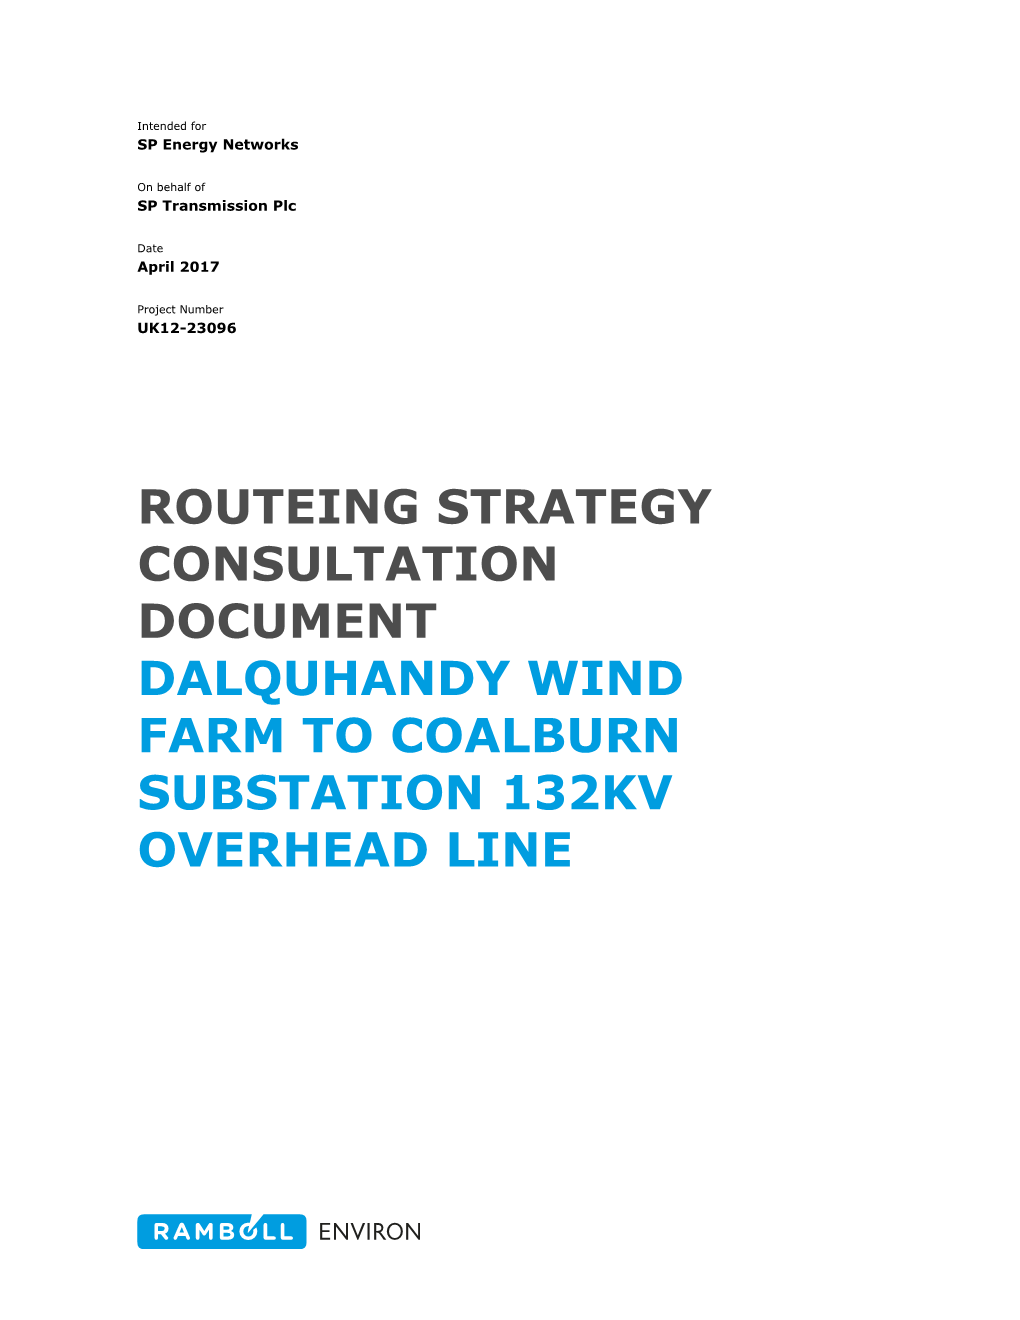 Routeing Strategy Consultation Document Dalquhandy Wind Farm to Coalburn Substation 132Kv Overhead Line